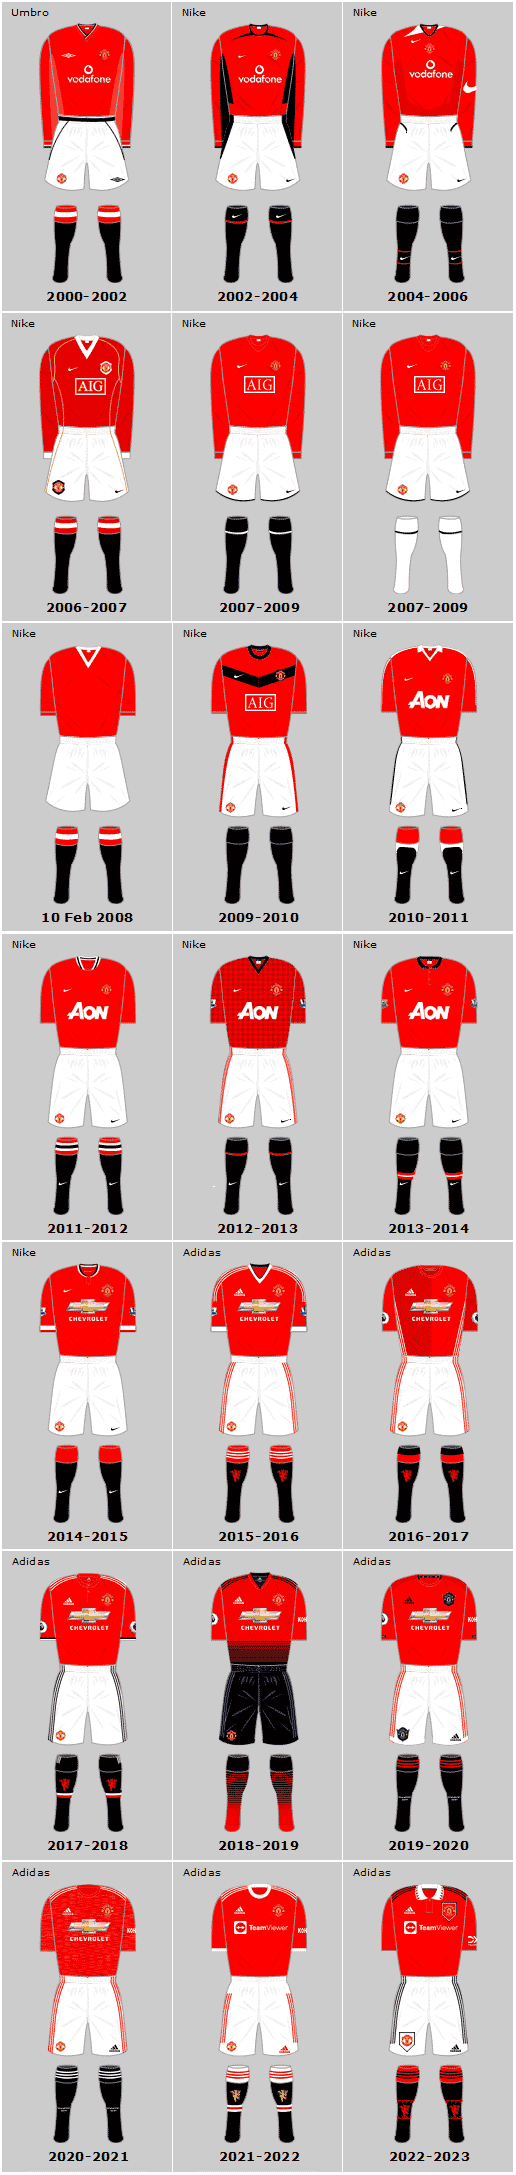 Manchester United 21st Century Home Playing Kits